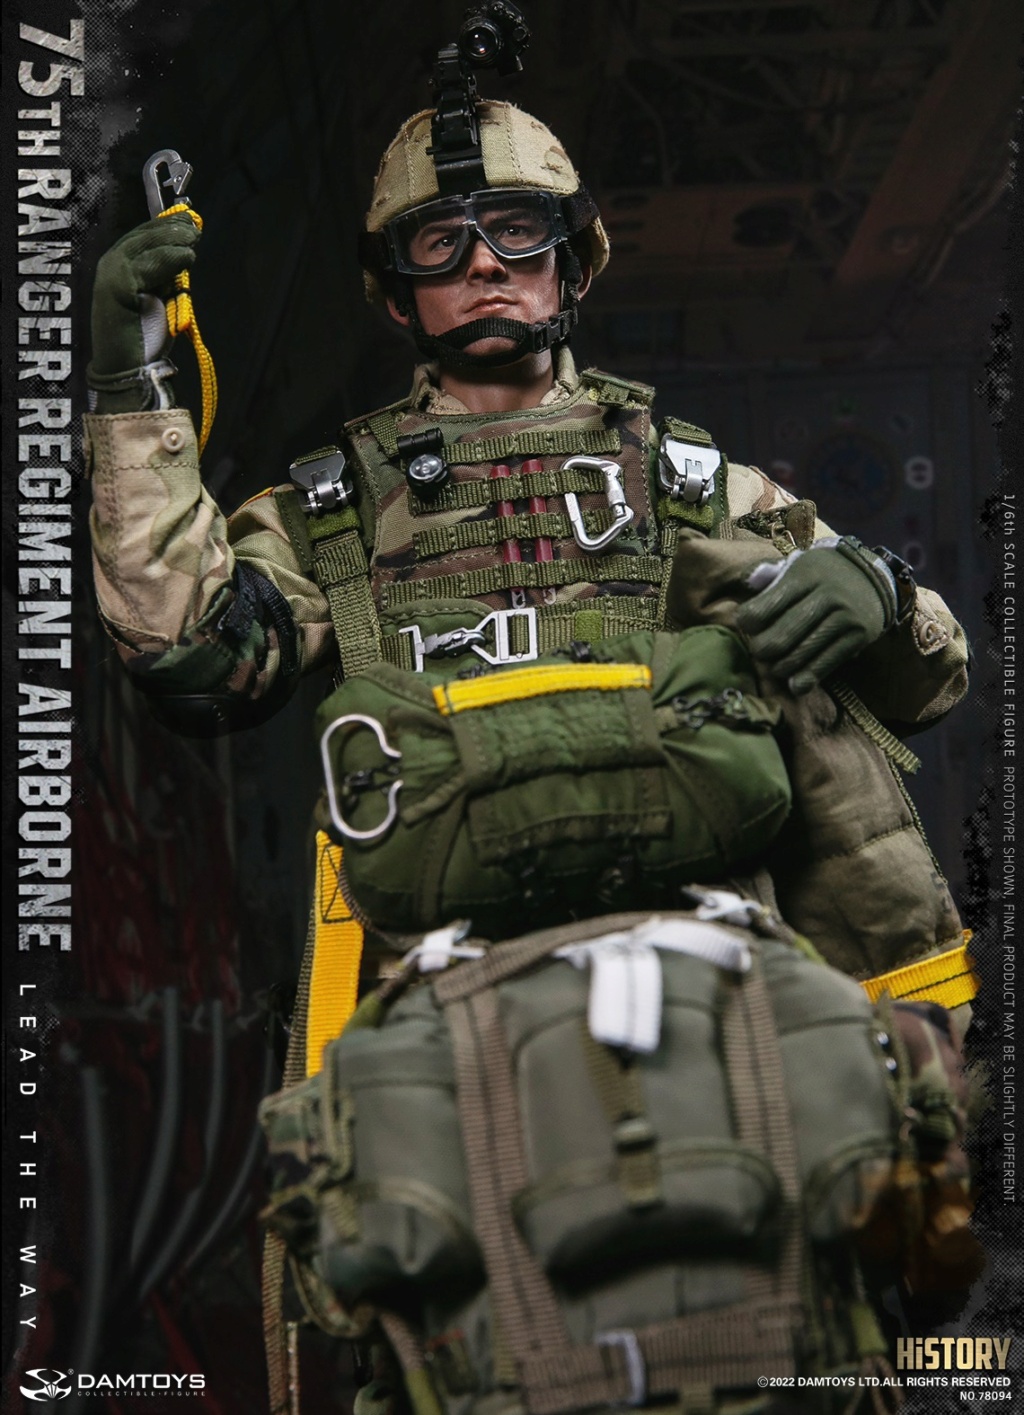 NEW PRODUCT: DAMTOYS: 78094 1/6 Scale 75th RANGER REGIMENT AIRBORNE 13312710